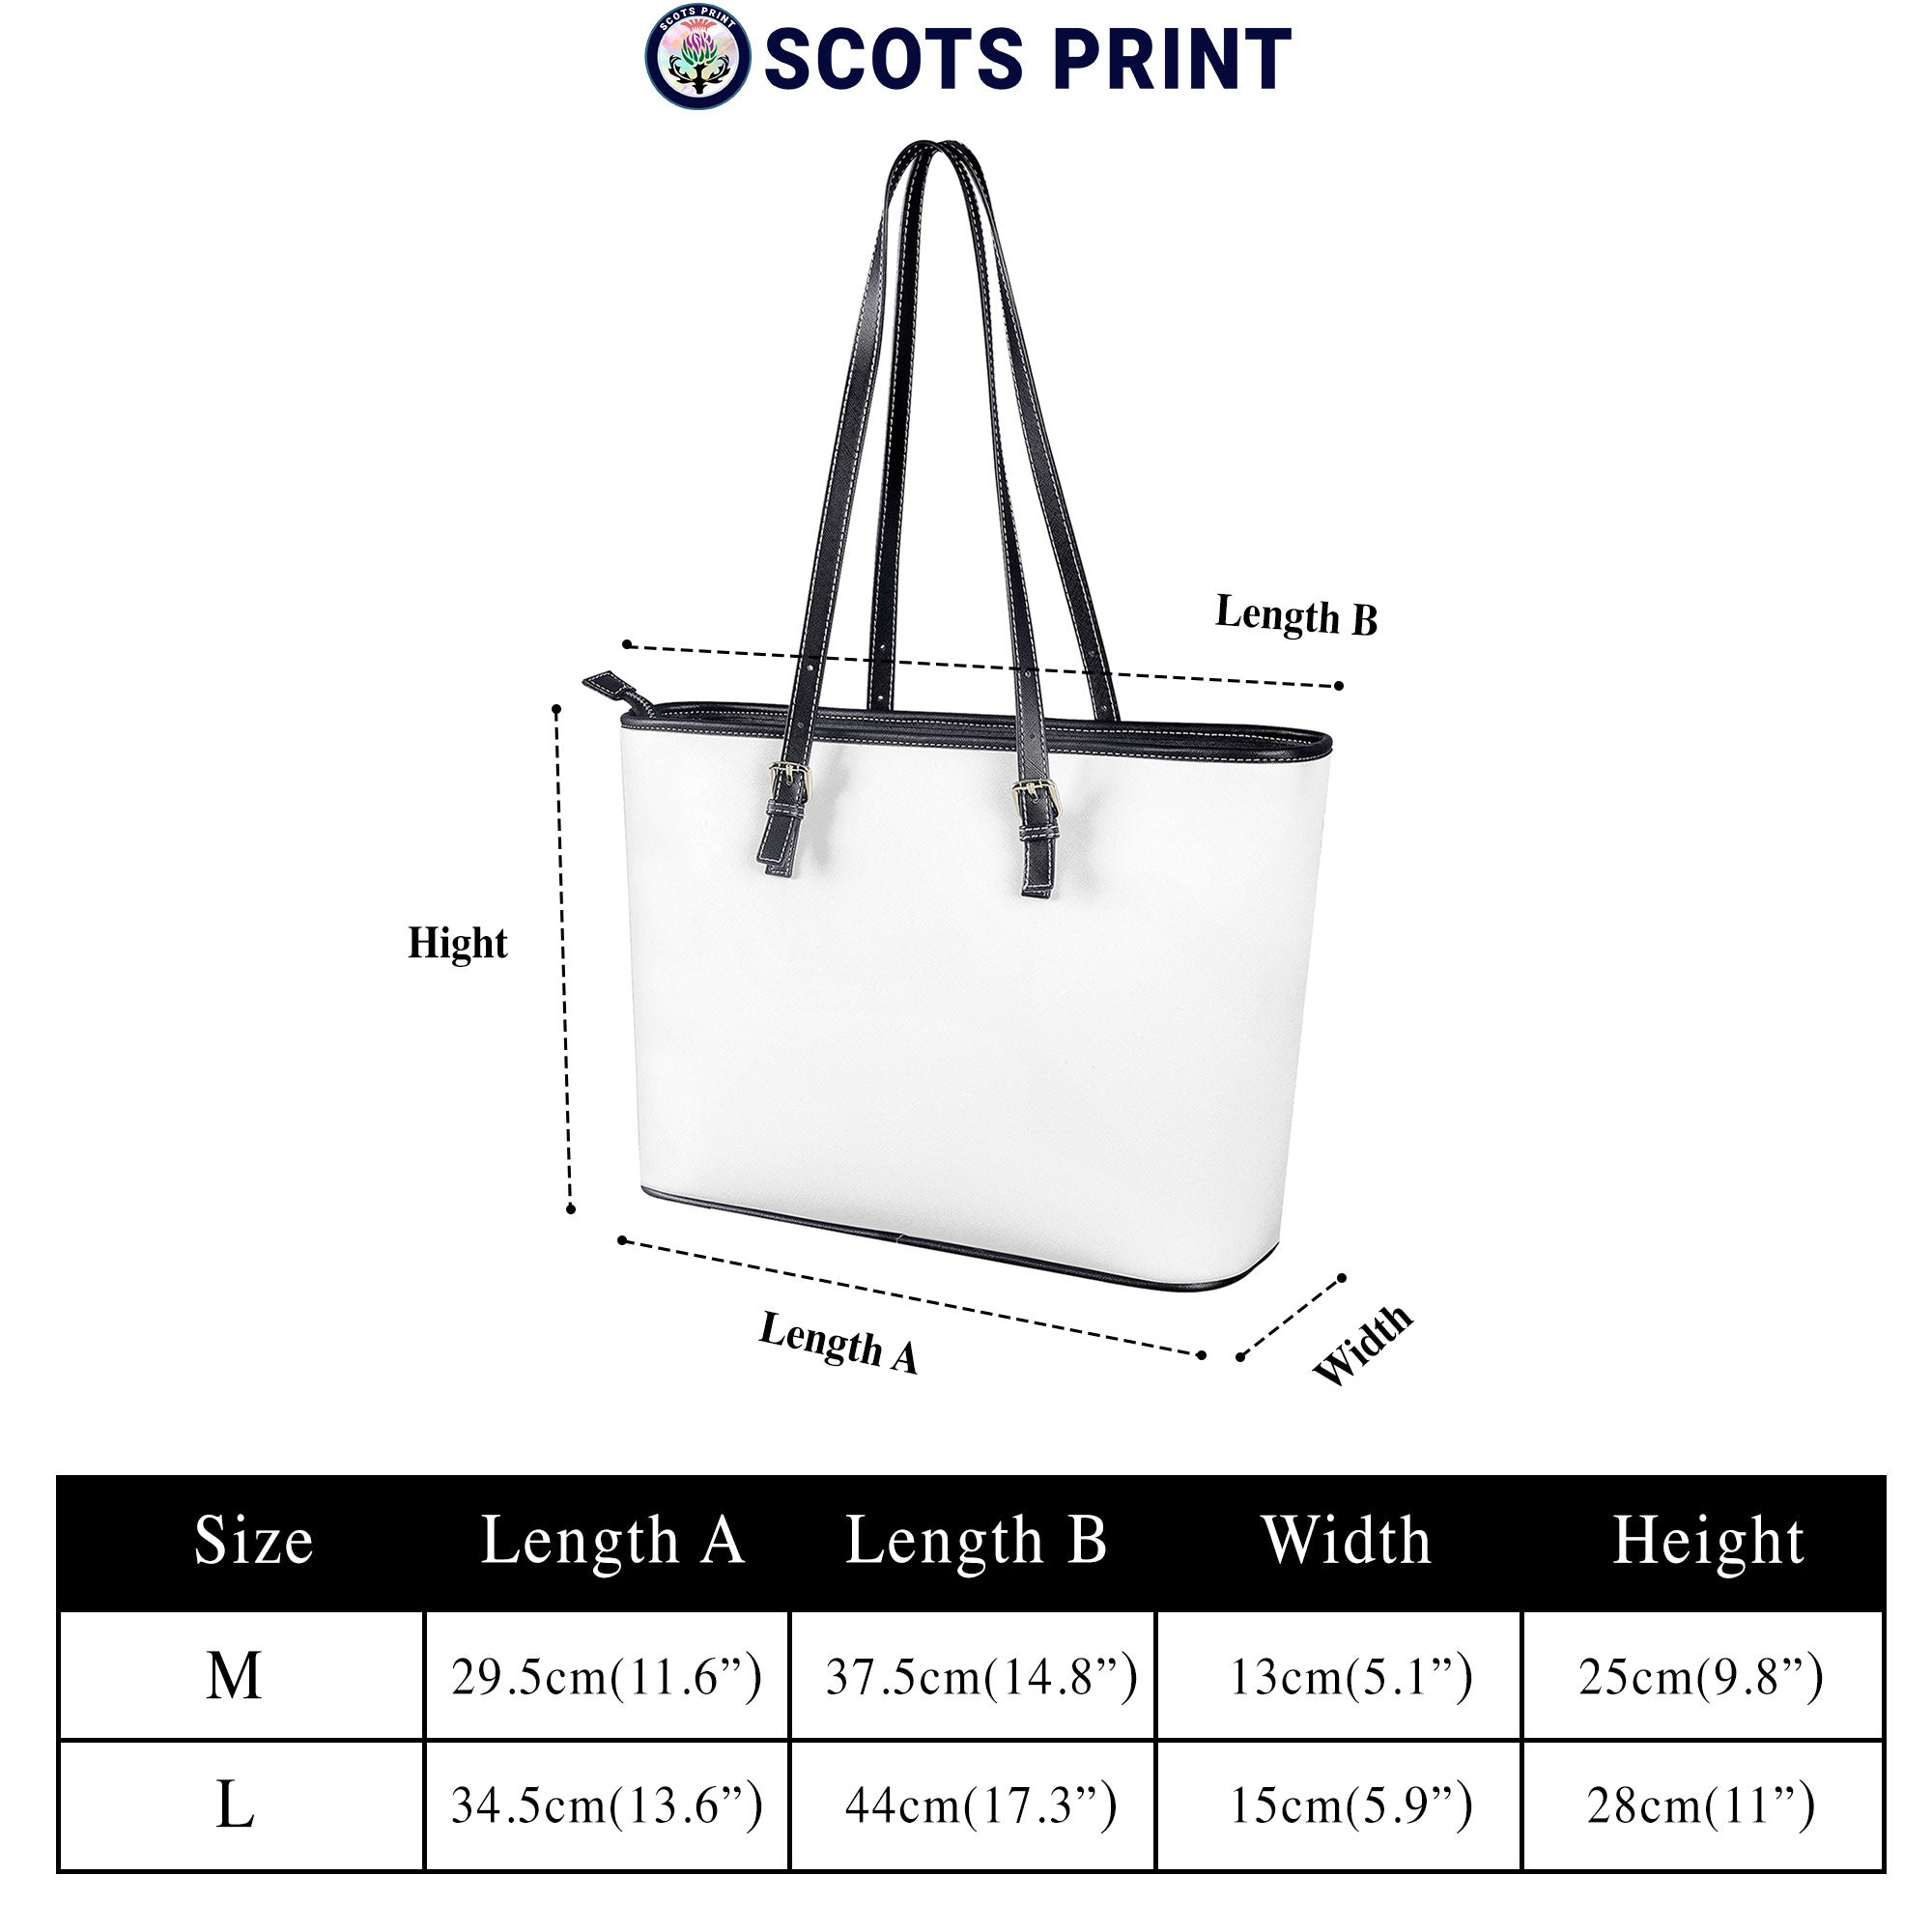 Guthrie Ancient Tartan Crest Leather Tote Bag